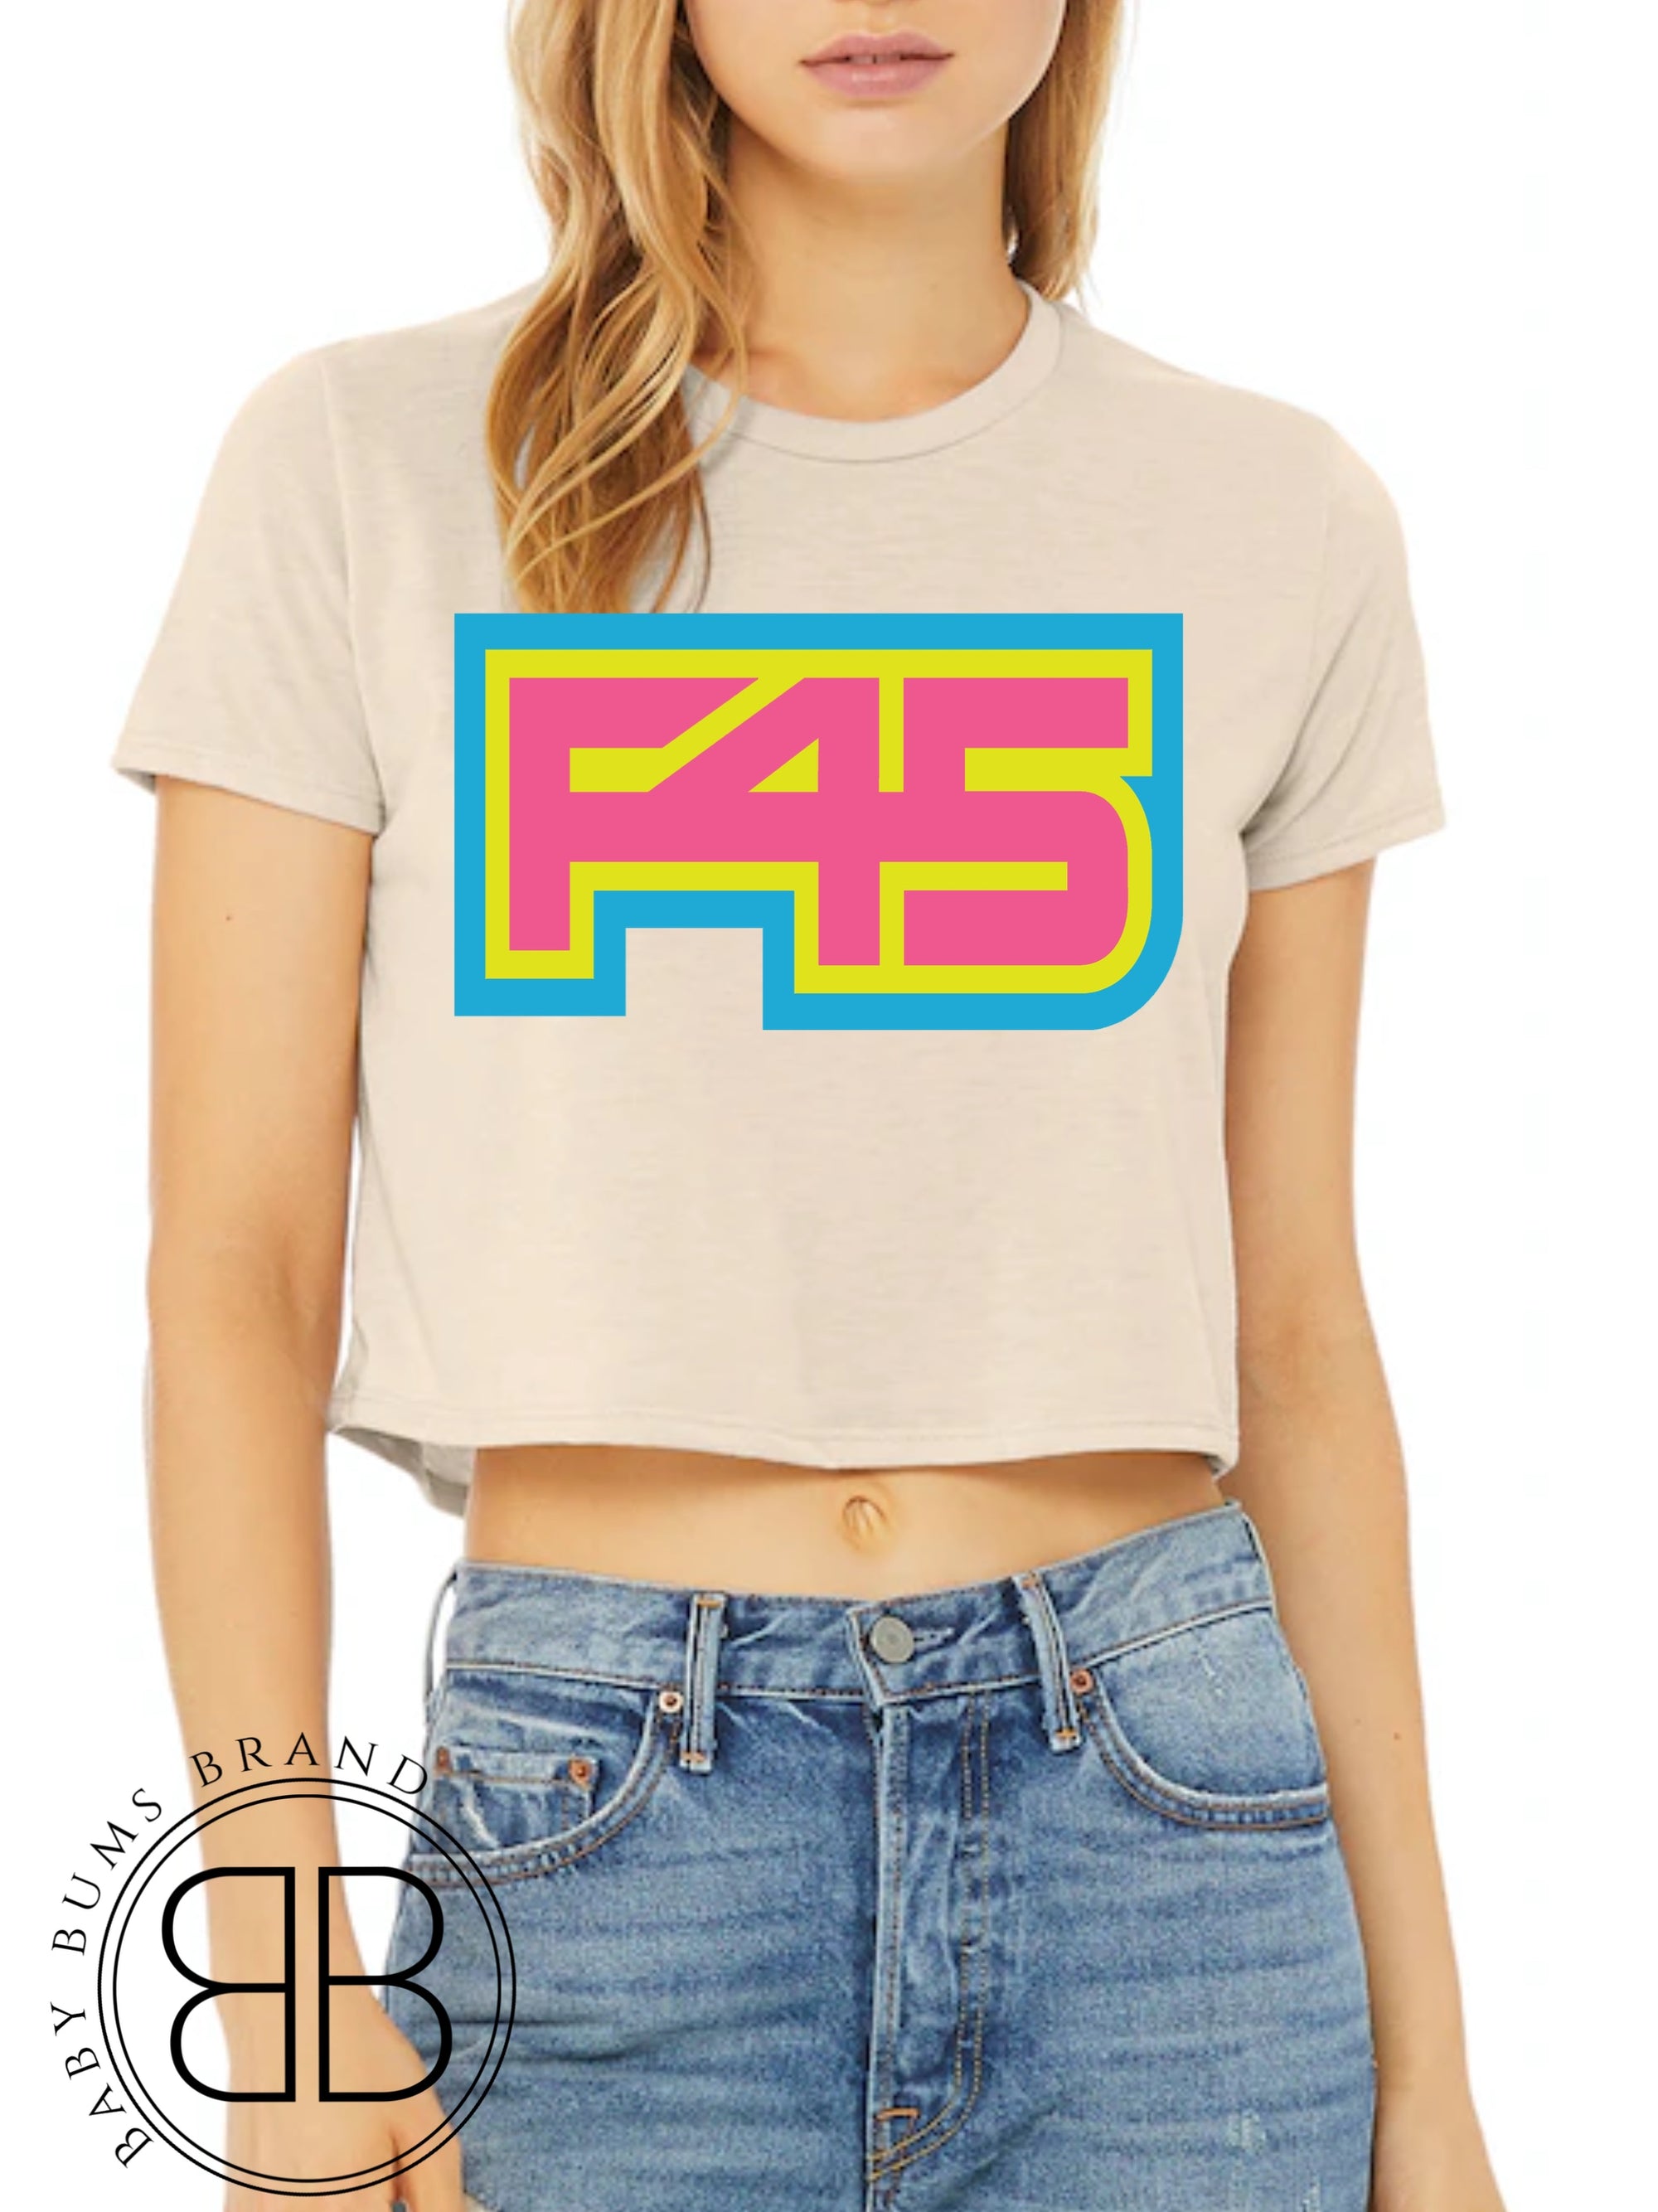 RTS ADULT 2XL CROP TOP NEON F45 - Baby Bums Clothing 